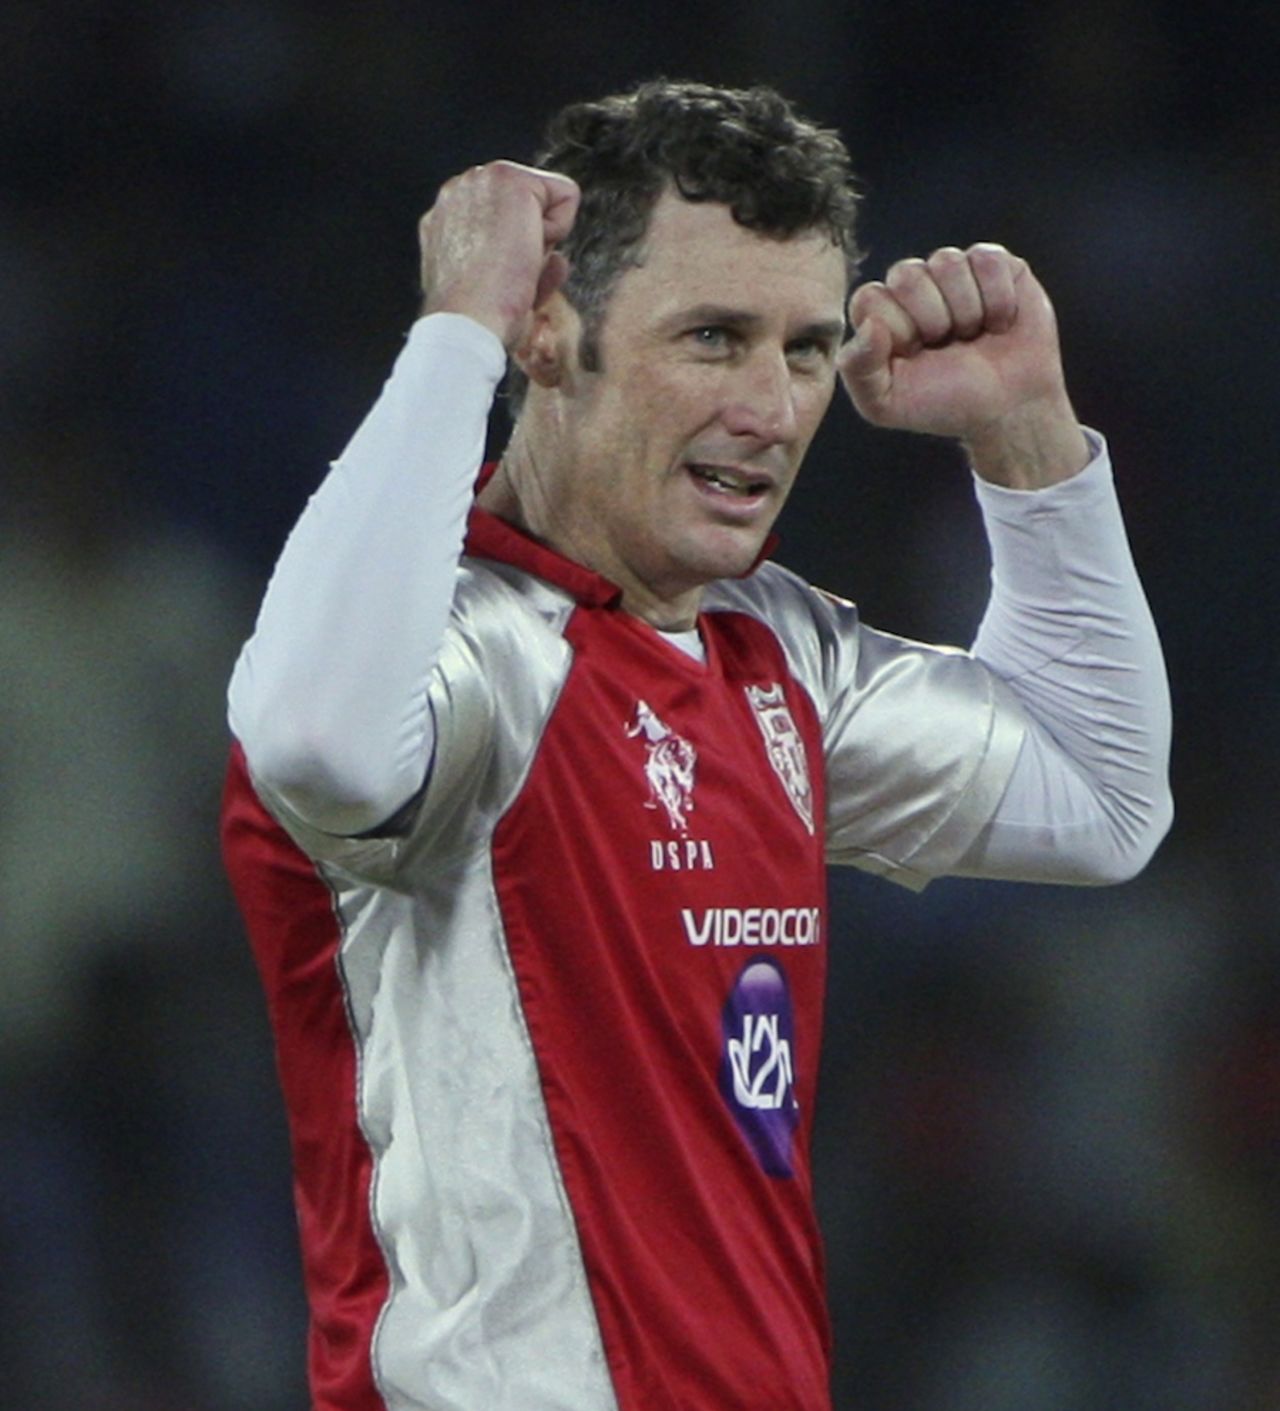 David Hussey took two wickets in an over to derail Deccan Chargers, Deccan Chargers v Kings XI Punjab, IPL, Hyderabad, May 8, 2012